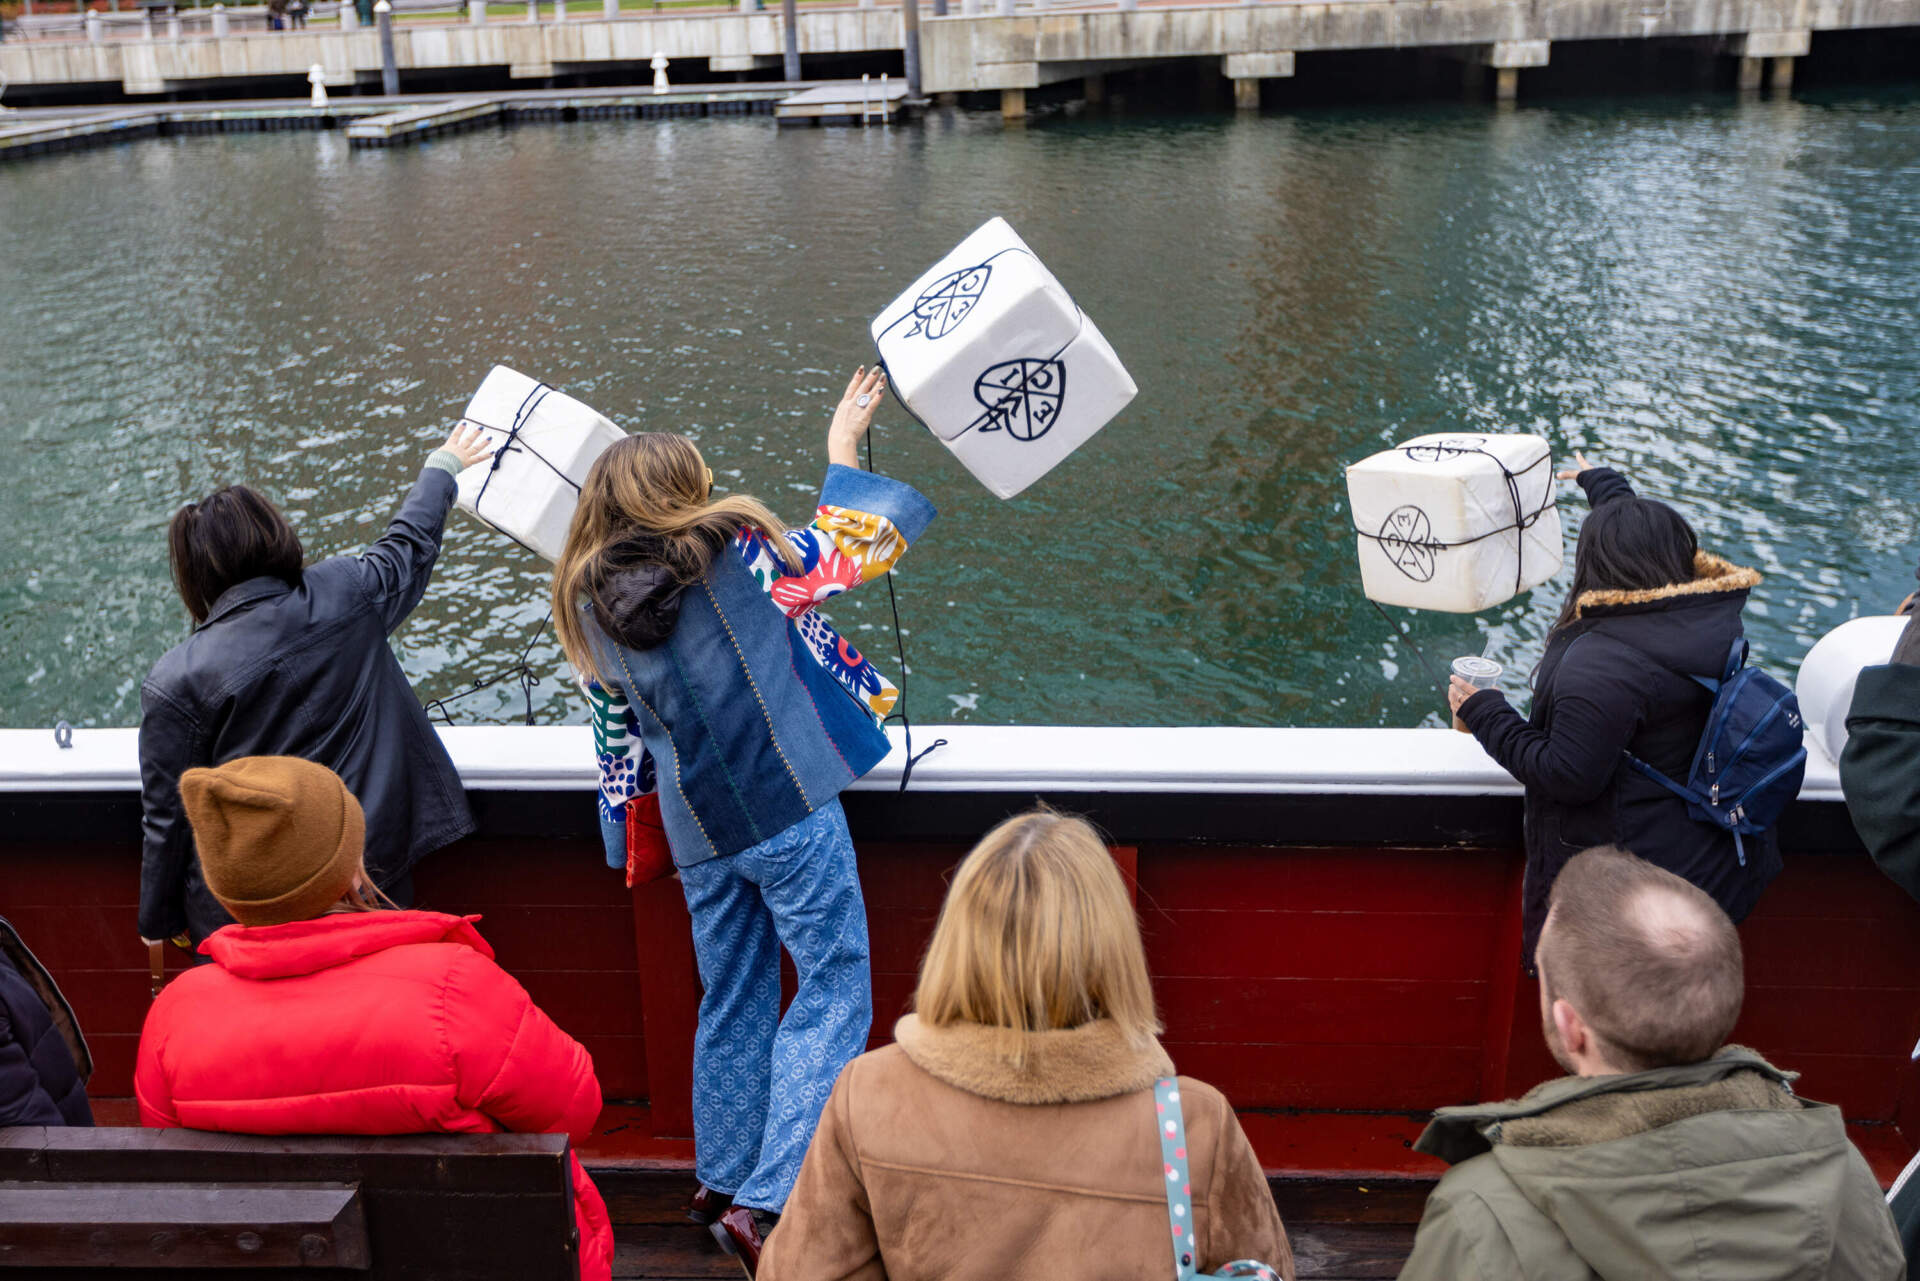 Museum goers toss crates with the emblem of the East India Company overboard into the Fort Point Channel from the brig Beaver during a visit to the Boston Tea Party Museum. (Jesse Costa/WBUR)